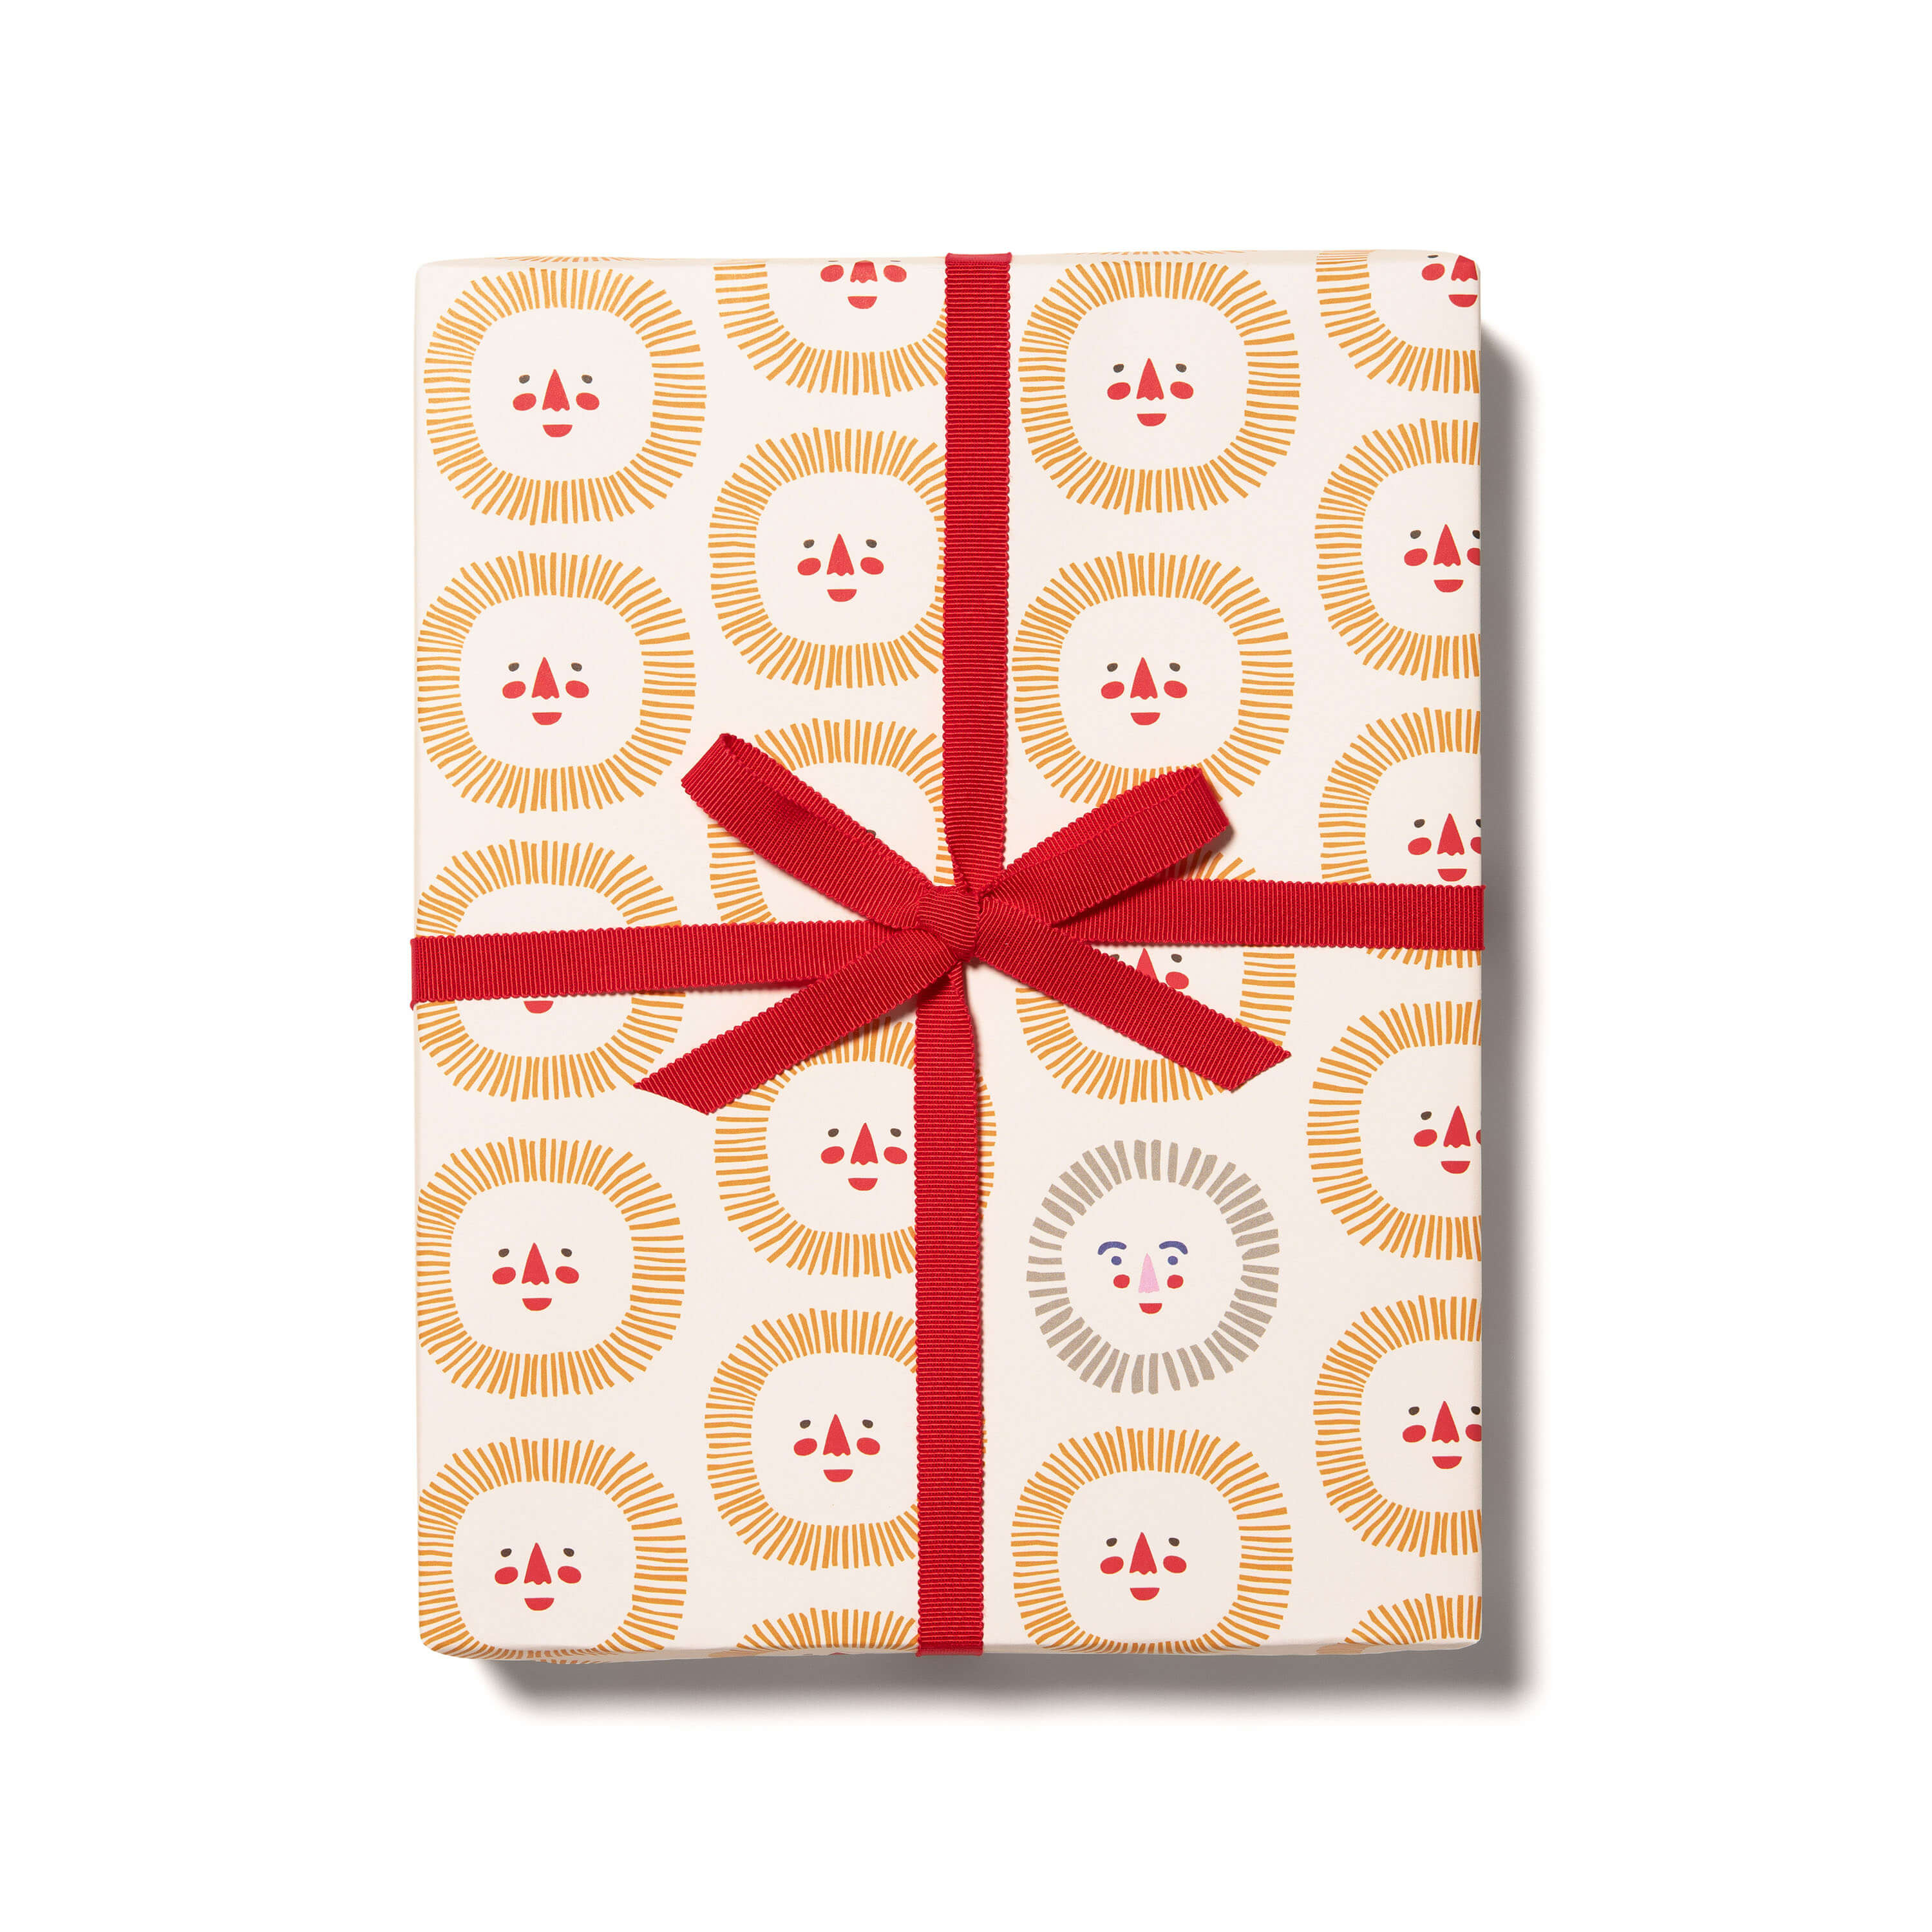 Sunshine Smiles wrapping paper SINGLE